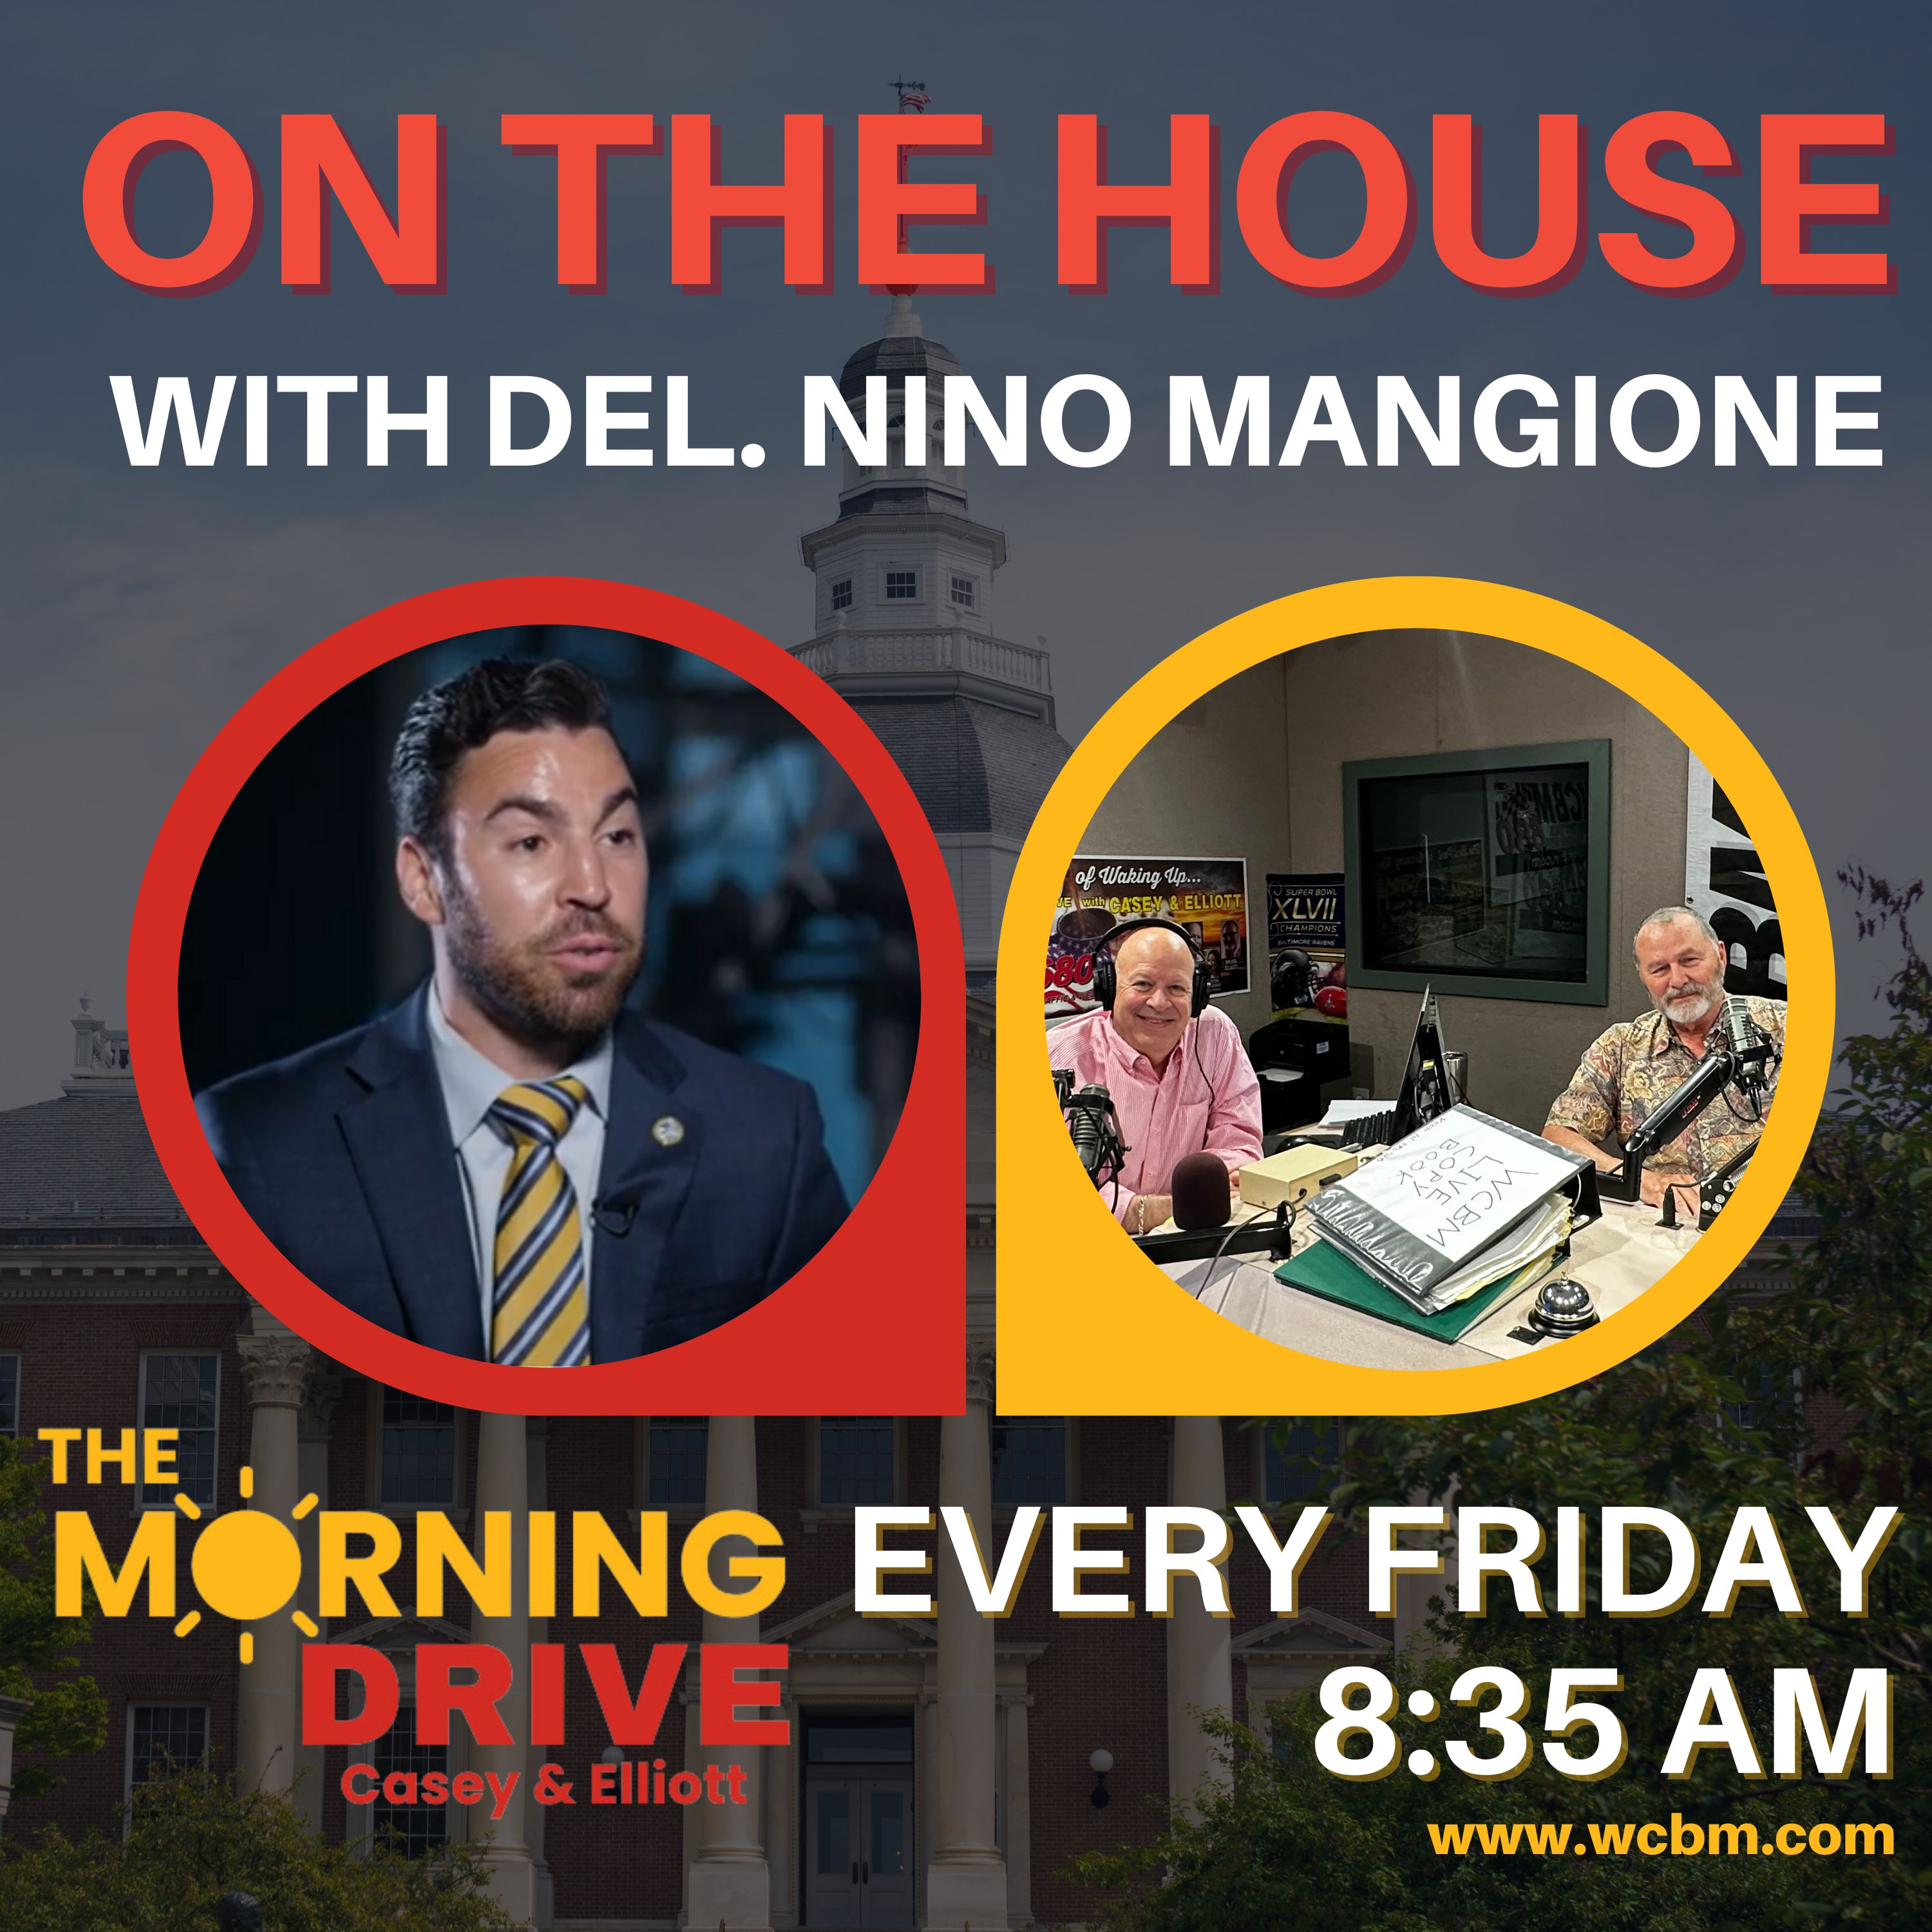 On the House with Del. Nino Mangione Episode 1